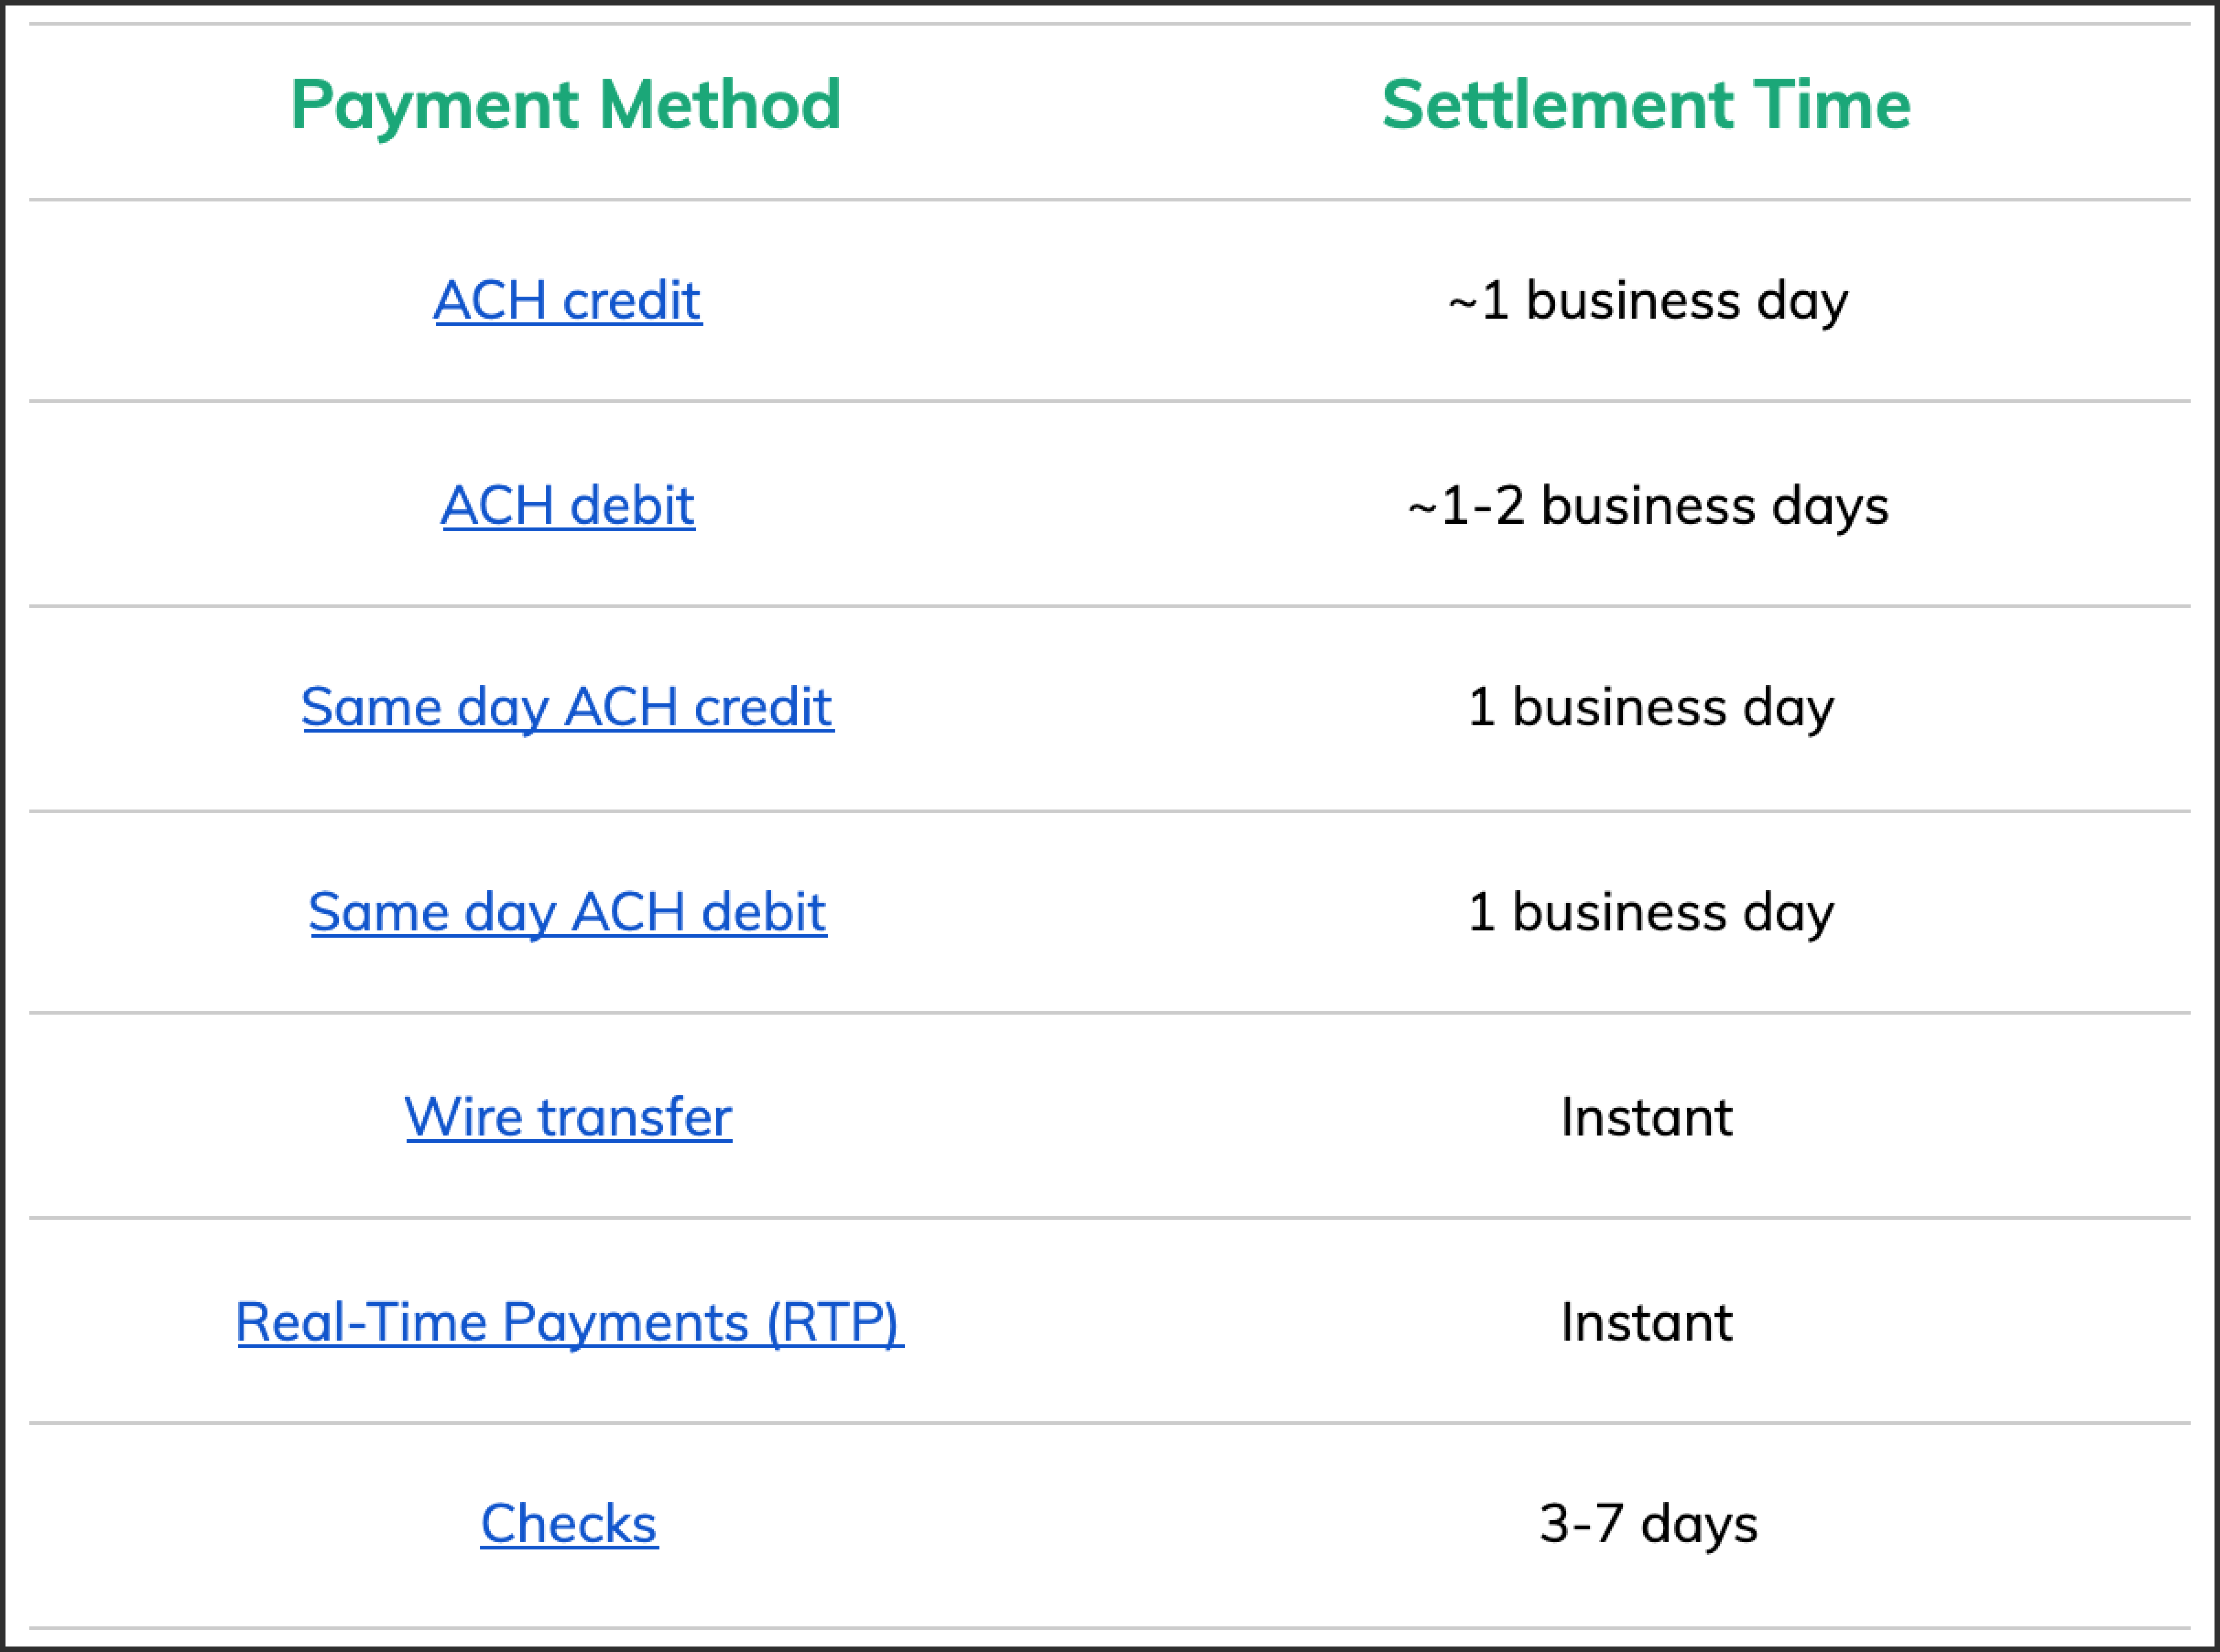 Chart with payment methods and settlement time